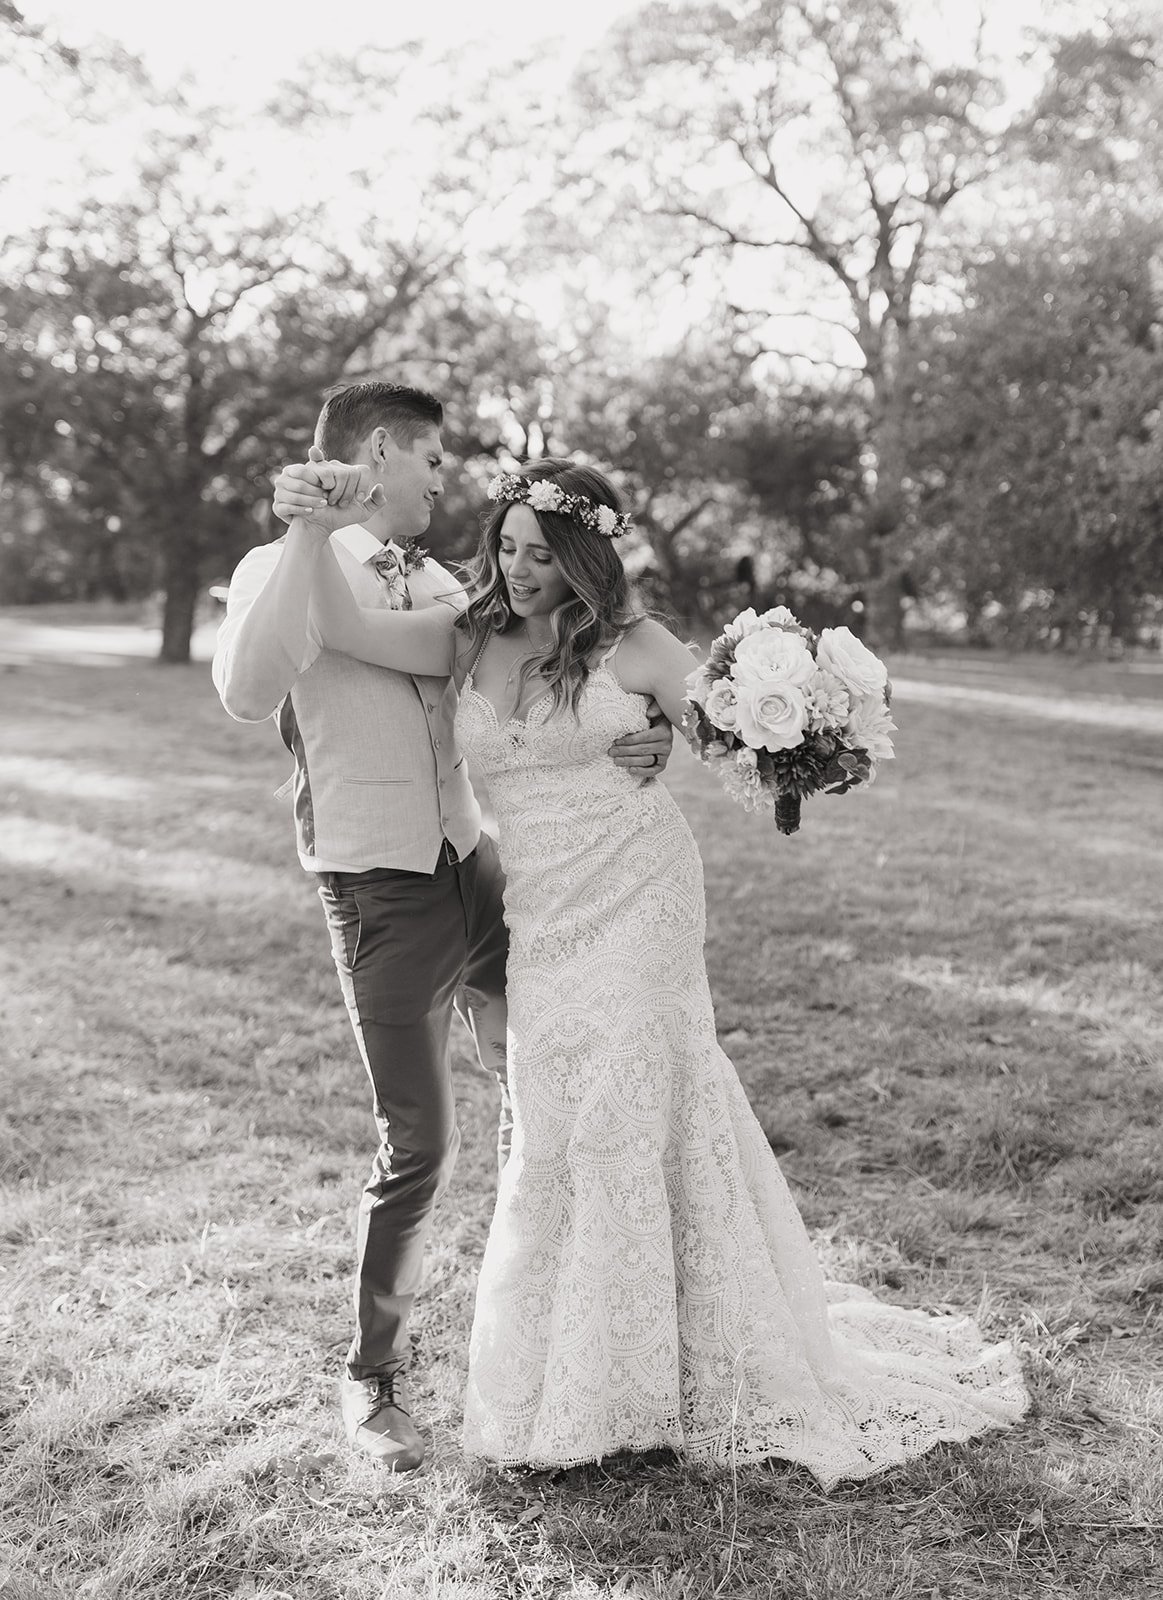 Another black and white photo of the couple dancing and having fun during portraits